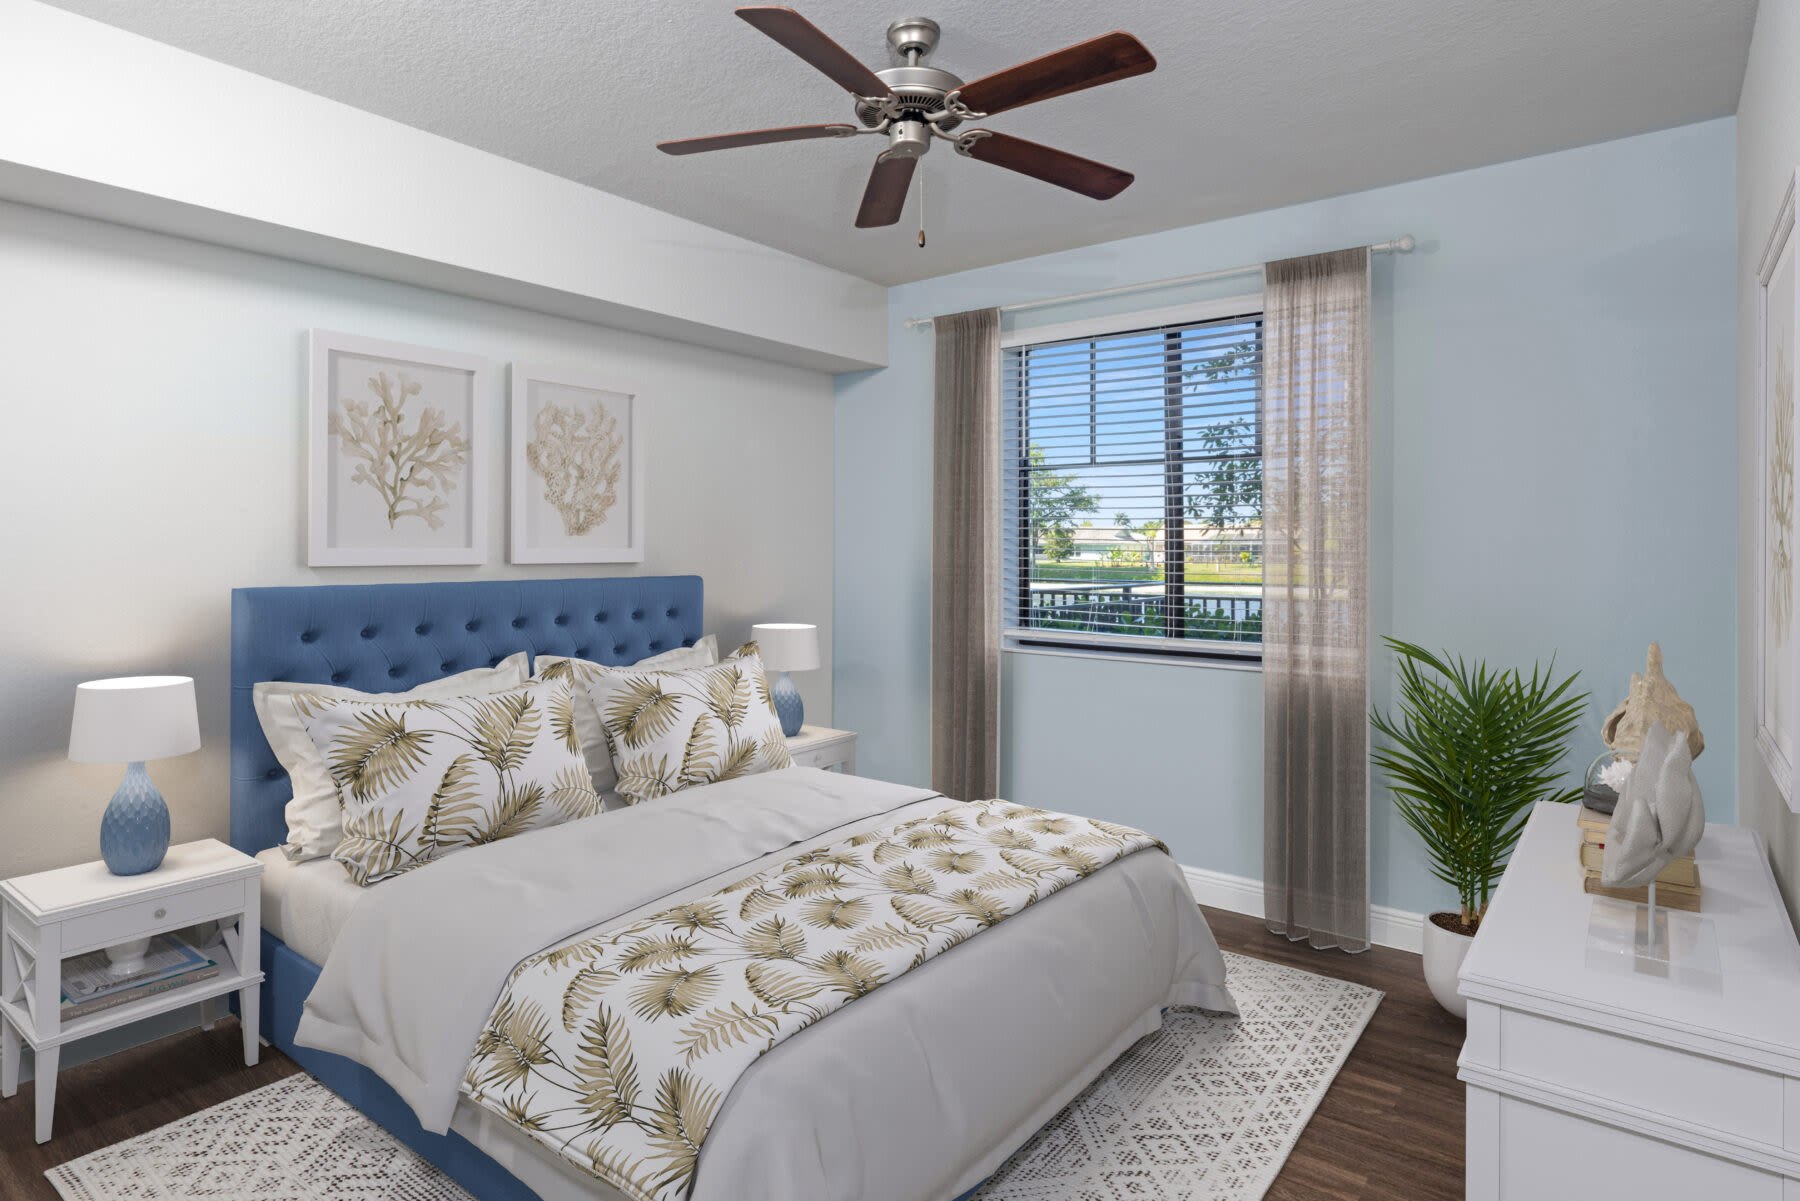 Experience the appeal of a furnished apartment model bedroom with natural light, modern furnishings, and wood-style flooring at Locklyn West Palm in West Palm Beach, Florida